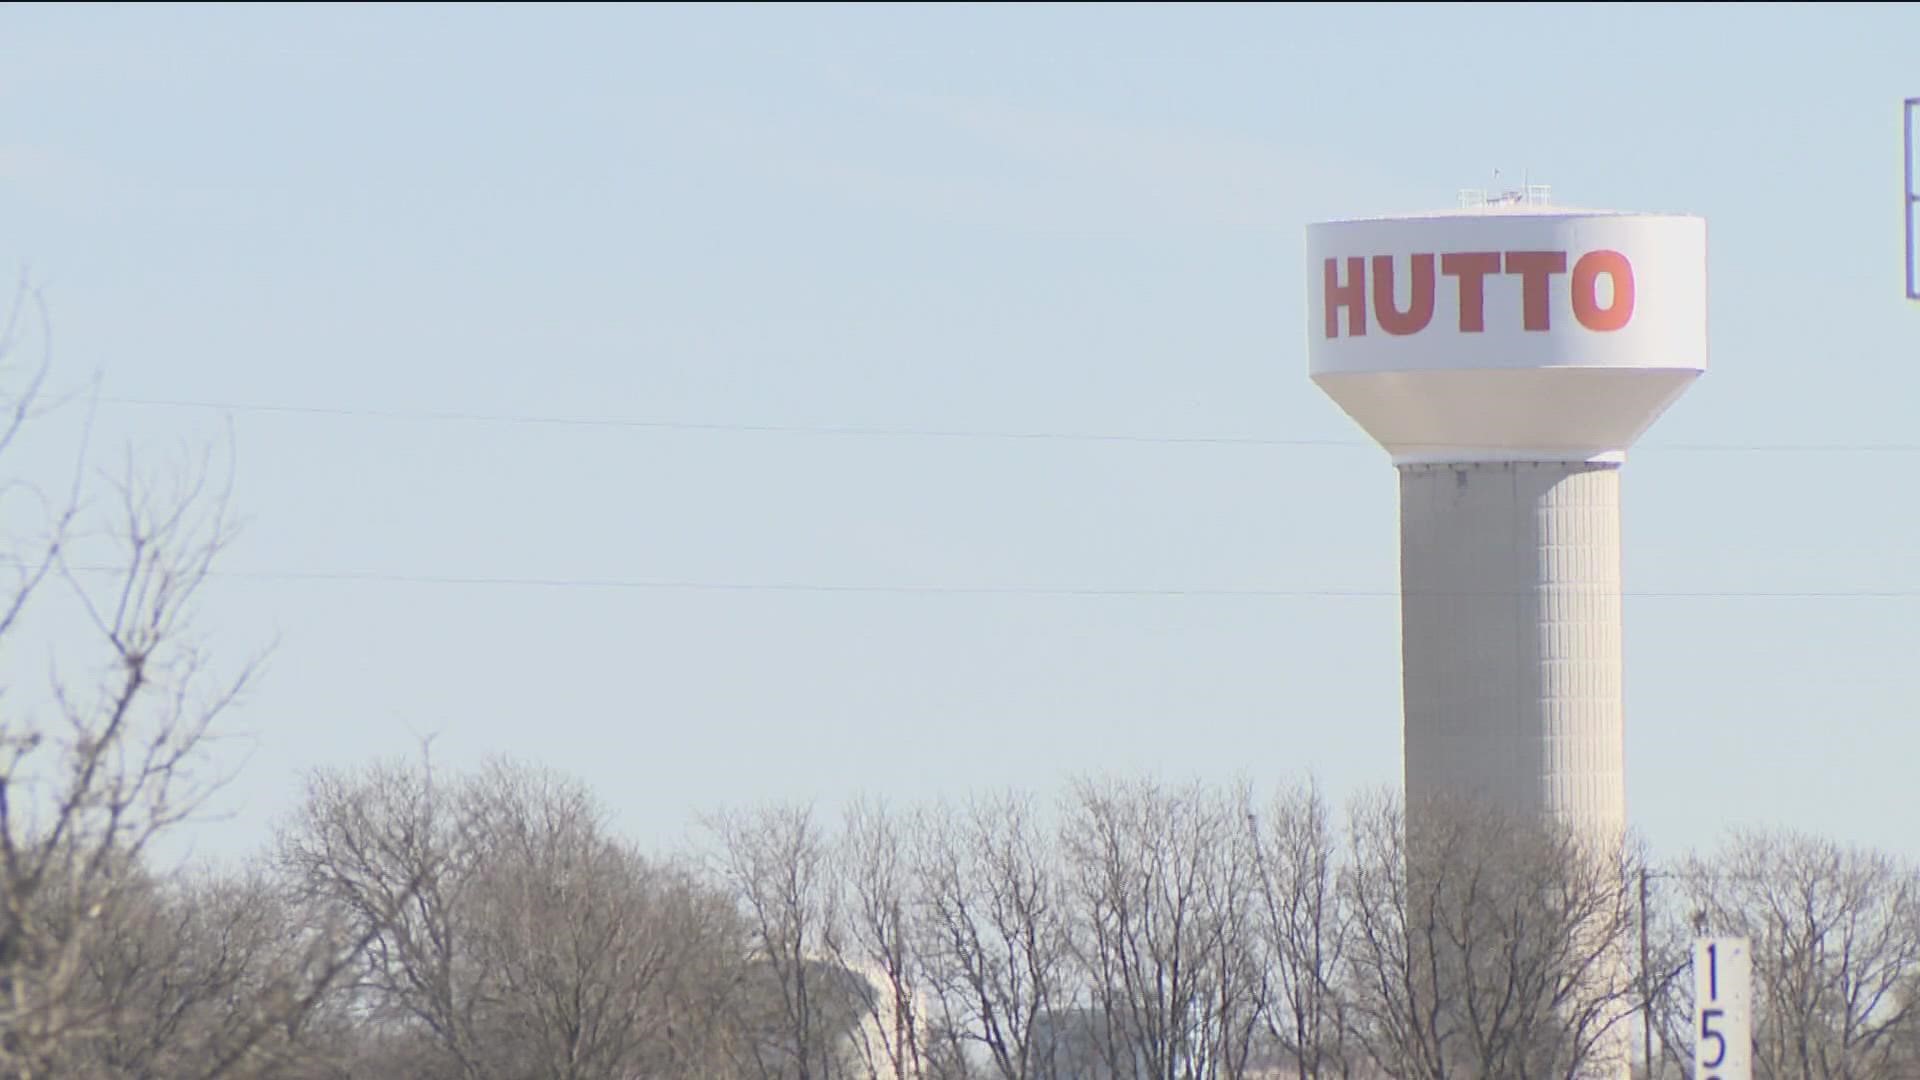 A major development is coming to Williamson County and the city of Hutto that will bring hundreds of jobs.